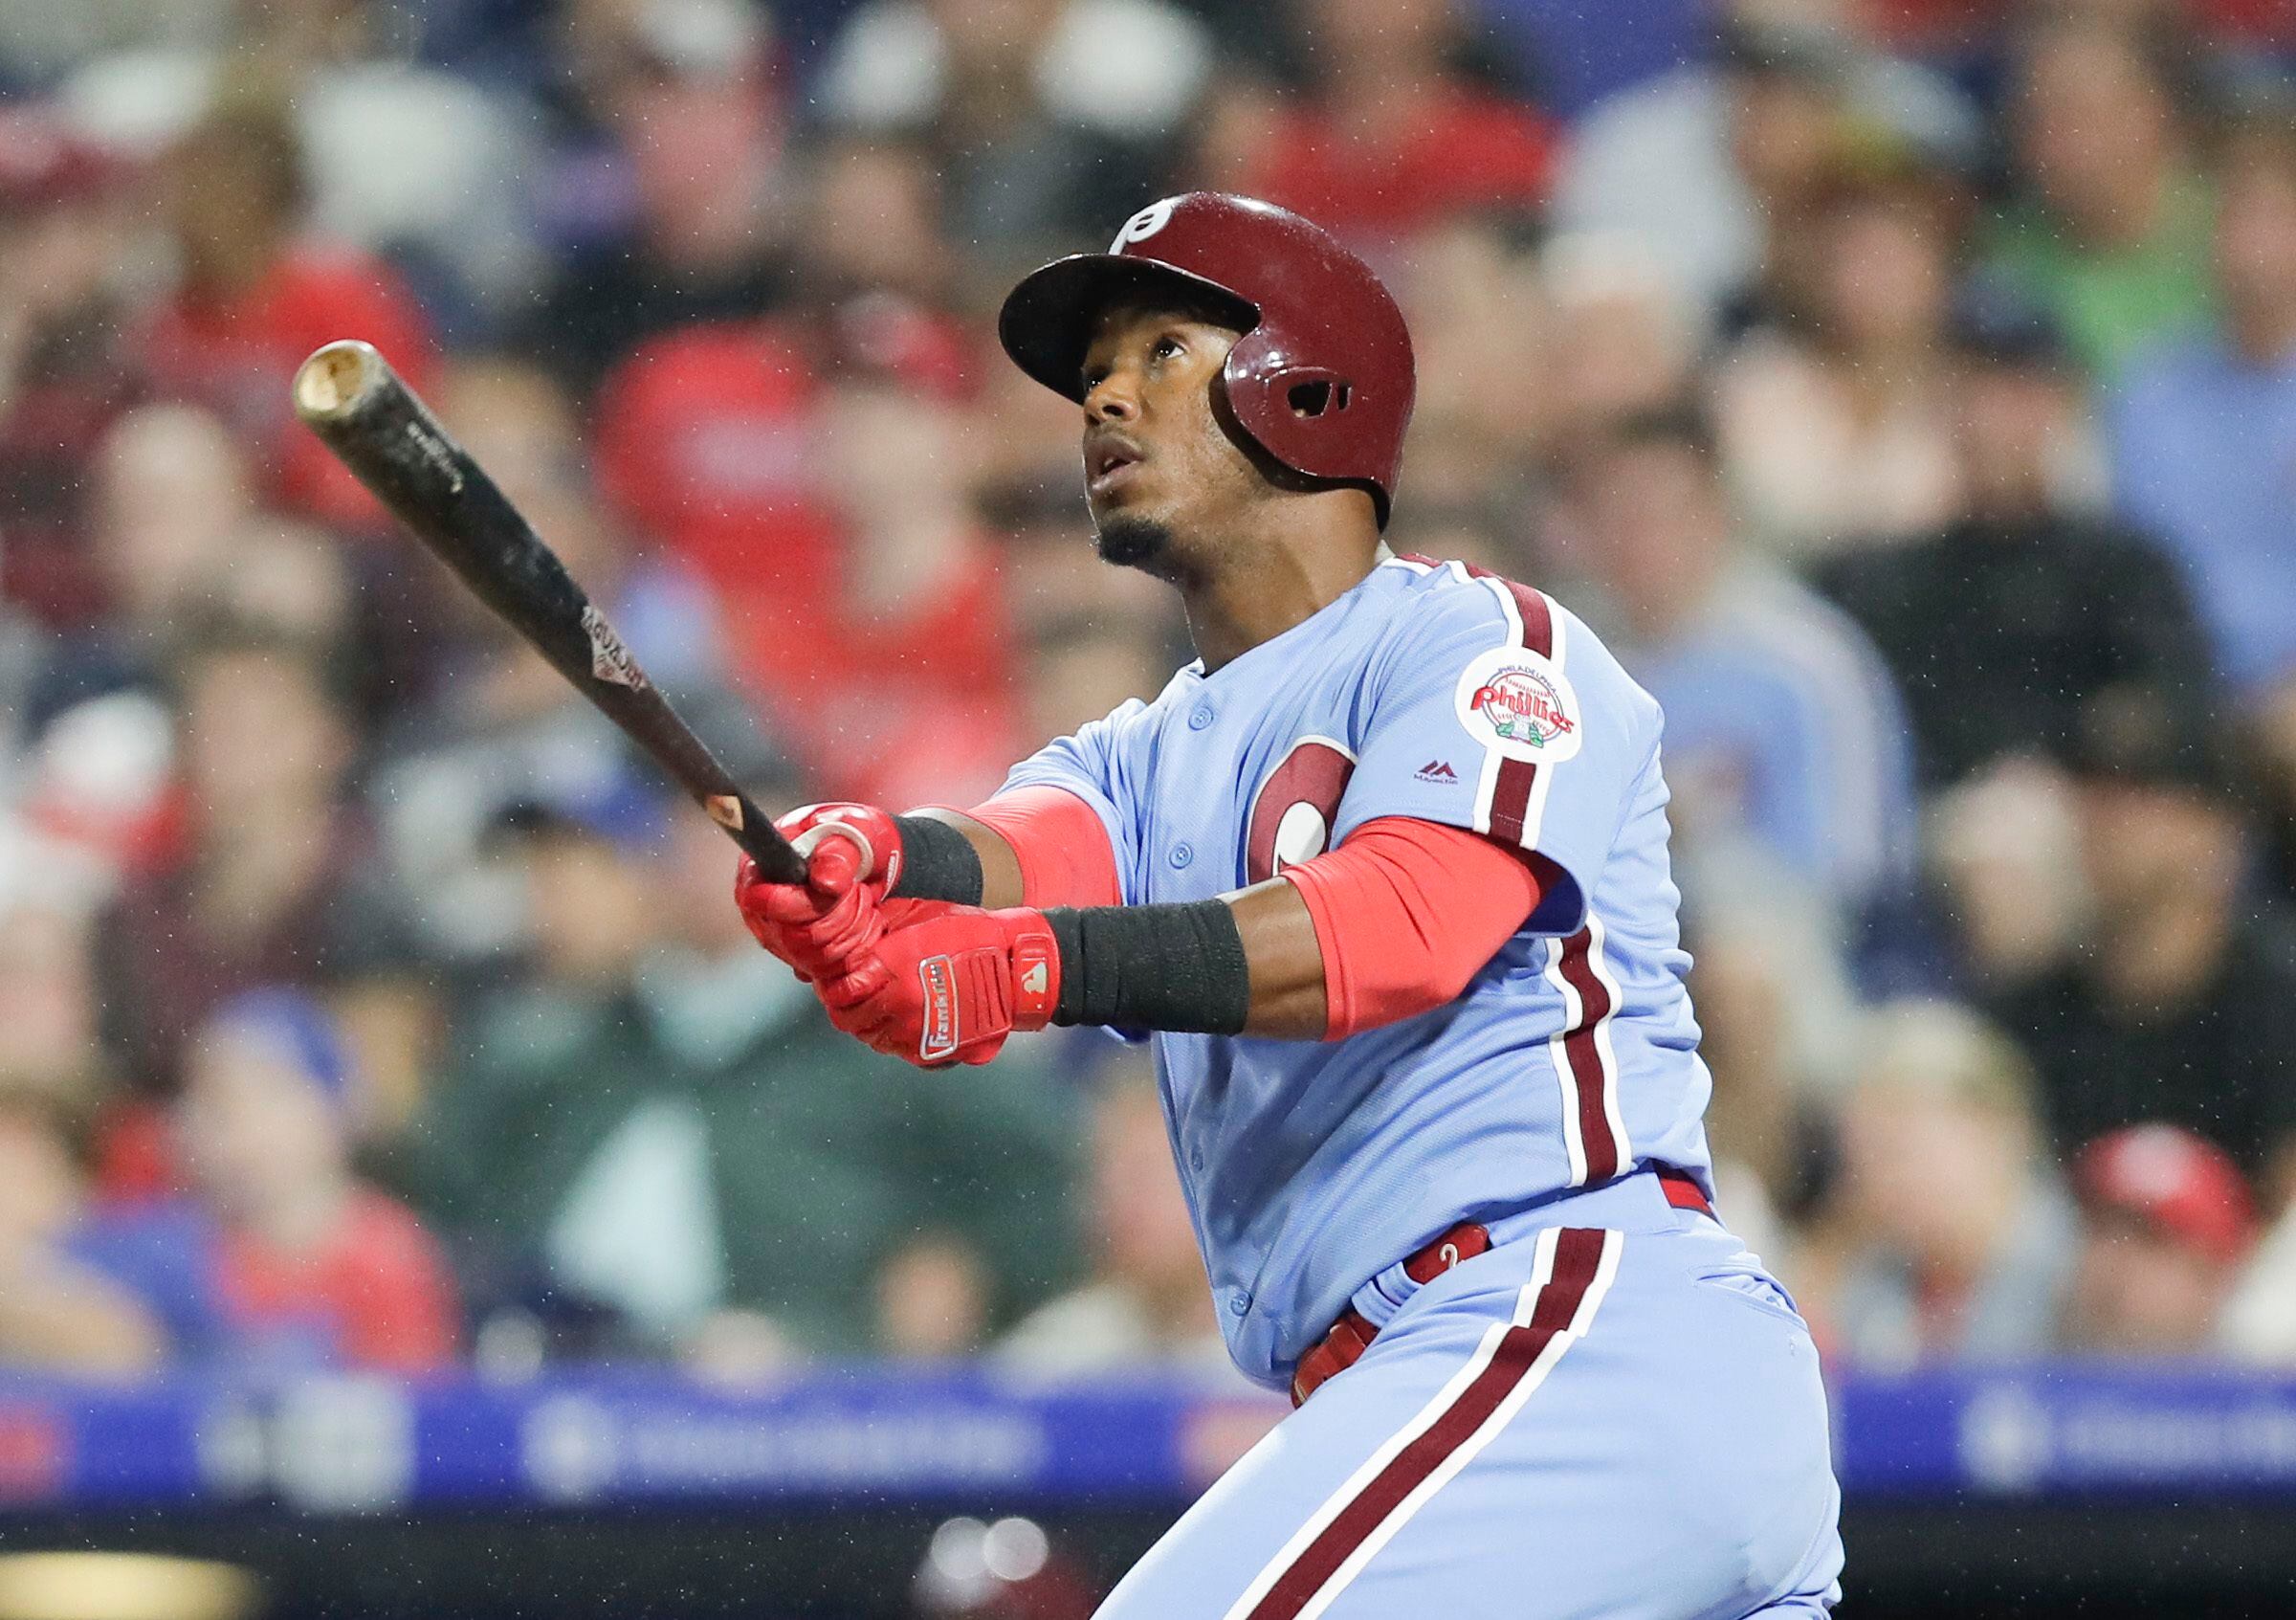 Braves manager Brian Snitker miffed by Phillies manager Gabe Kapler's  delayed call to Hector Neris in bullpen